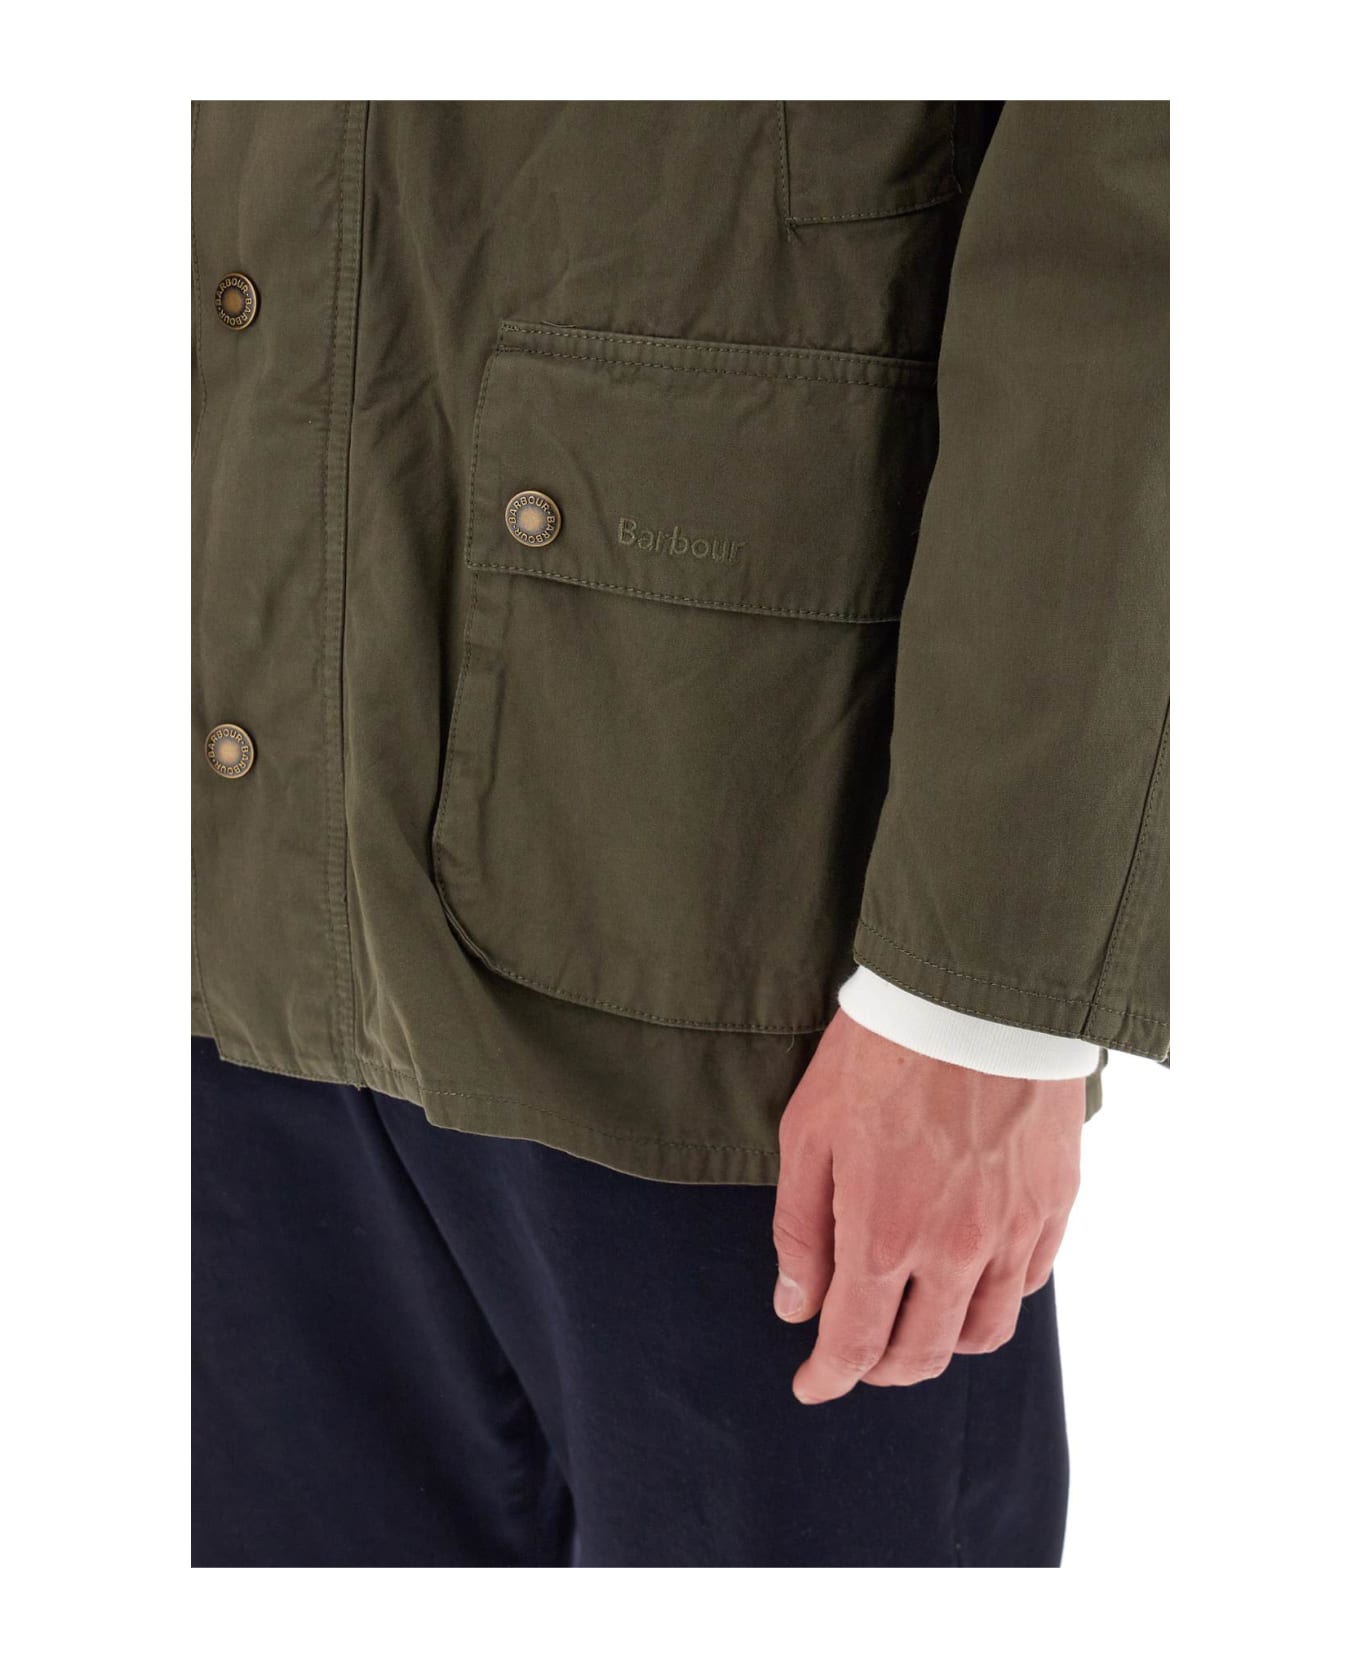 Barbour 'ashby' Casual Jacket - Verde